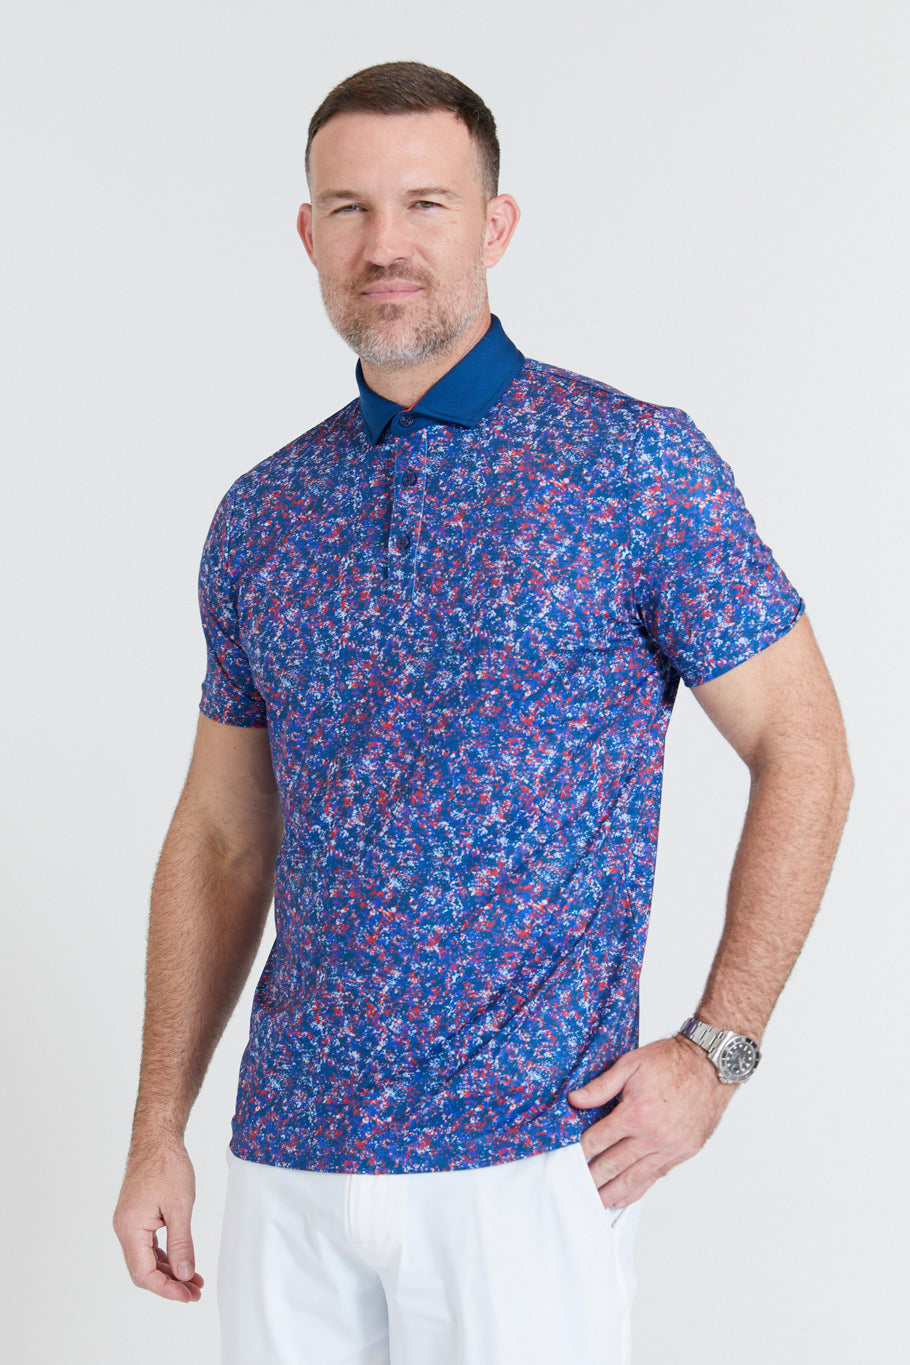 Image of the maxwell polo in admiral